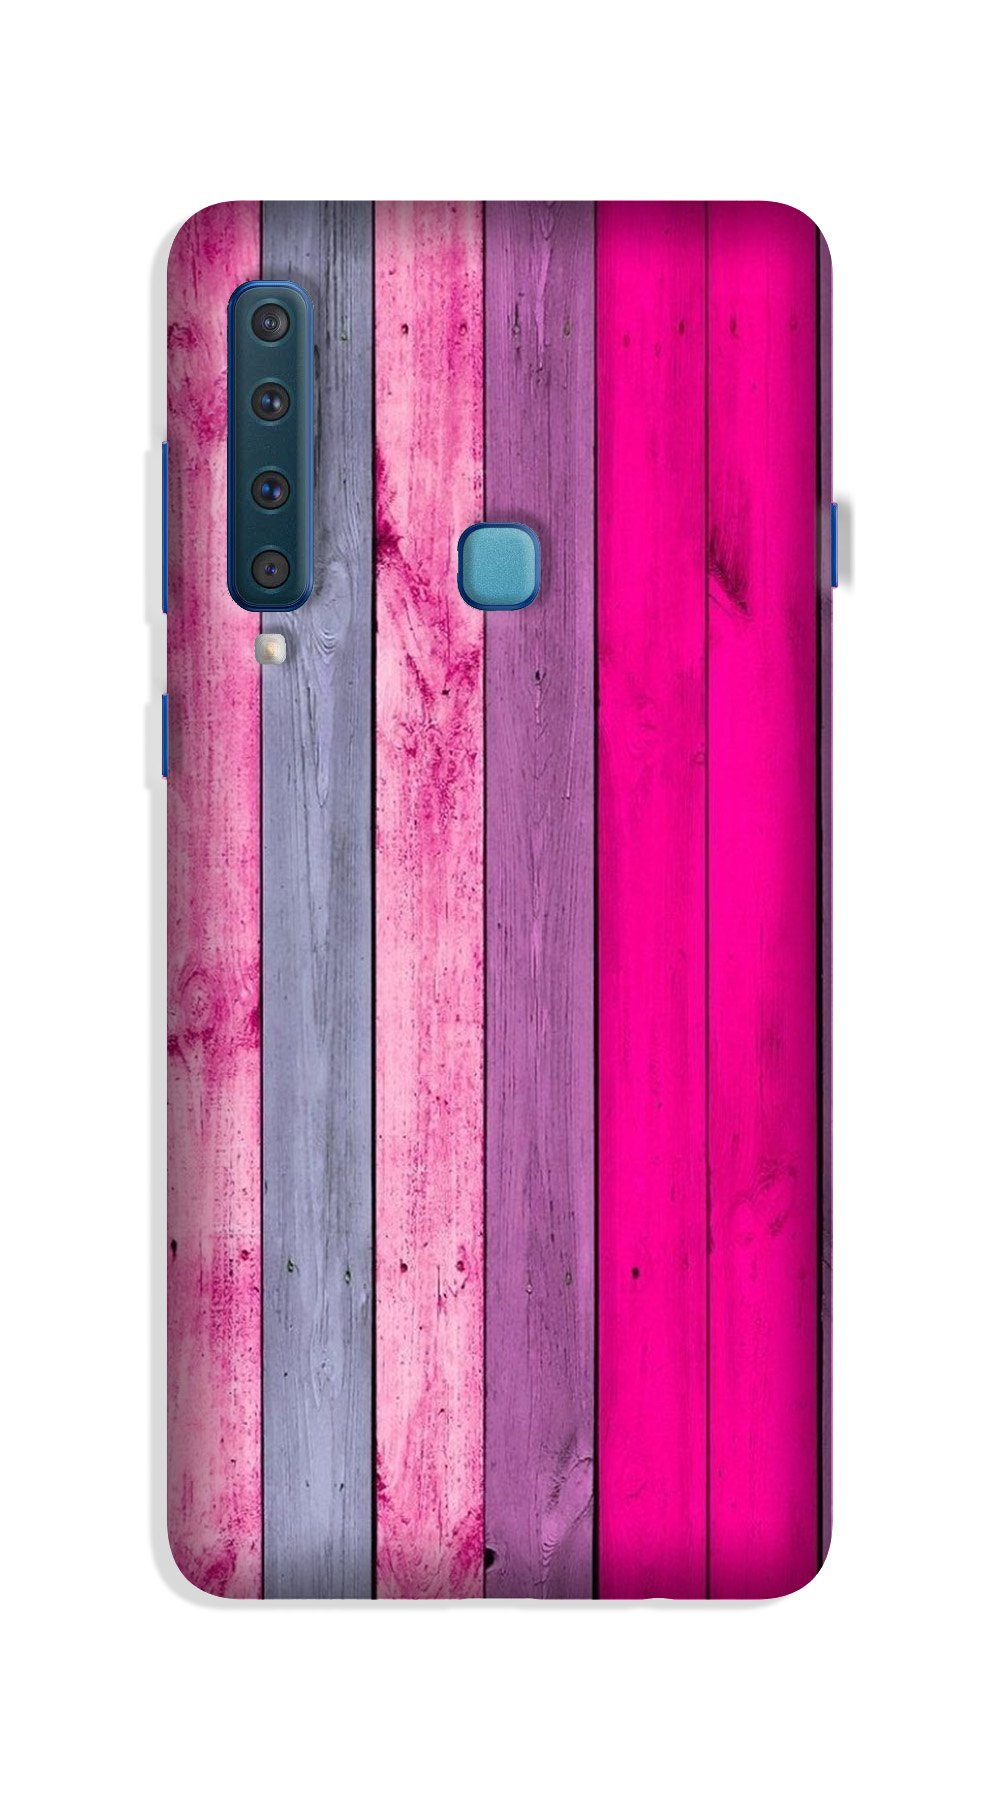 Wooden look Case for Galaxy A9 (2018)